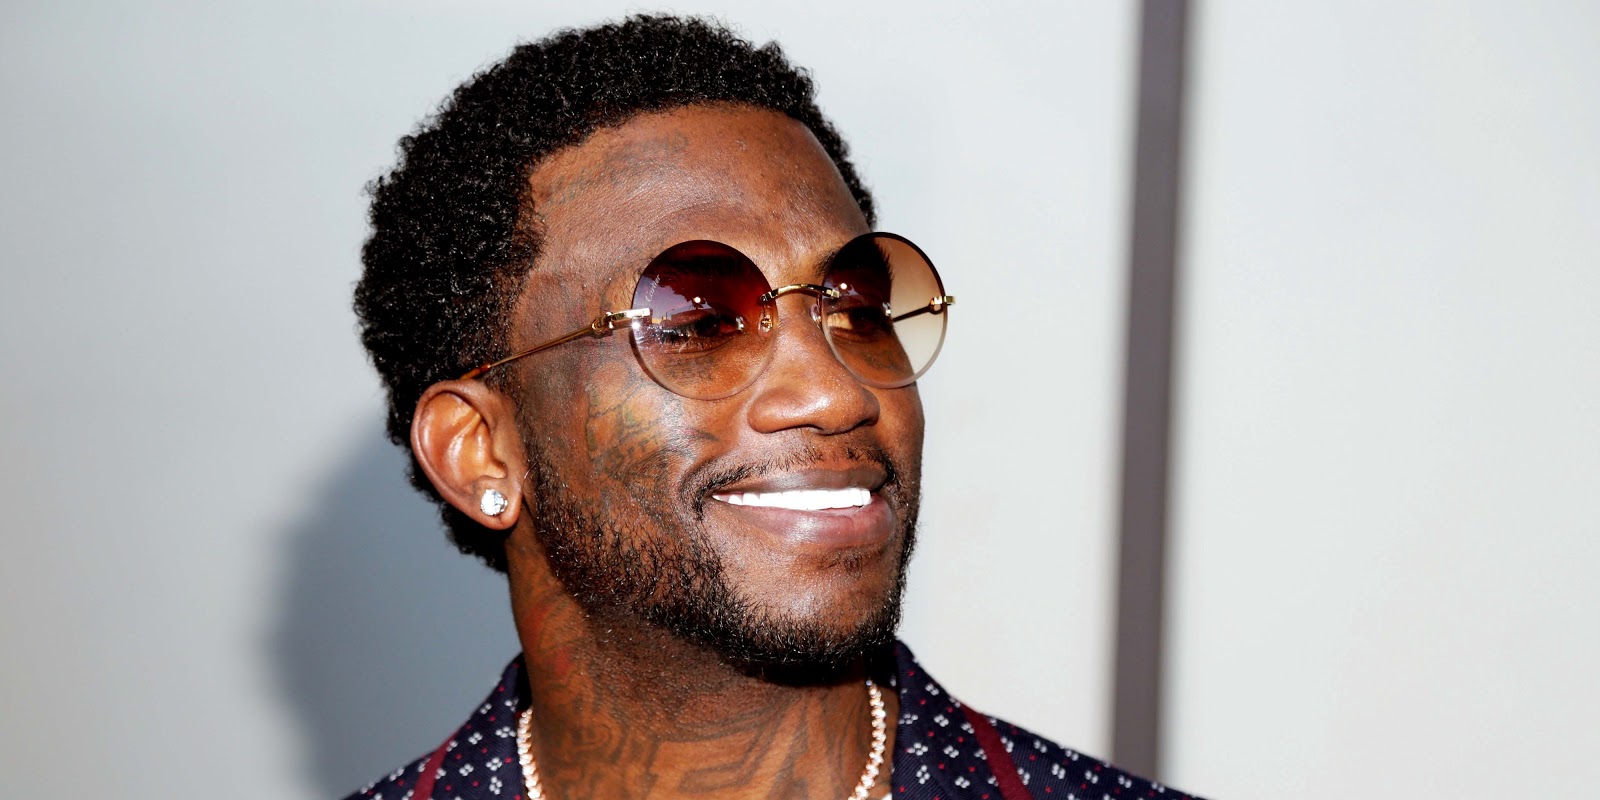 What Does Gucci Mane's Ice Cream Cone Tattoo Mean?